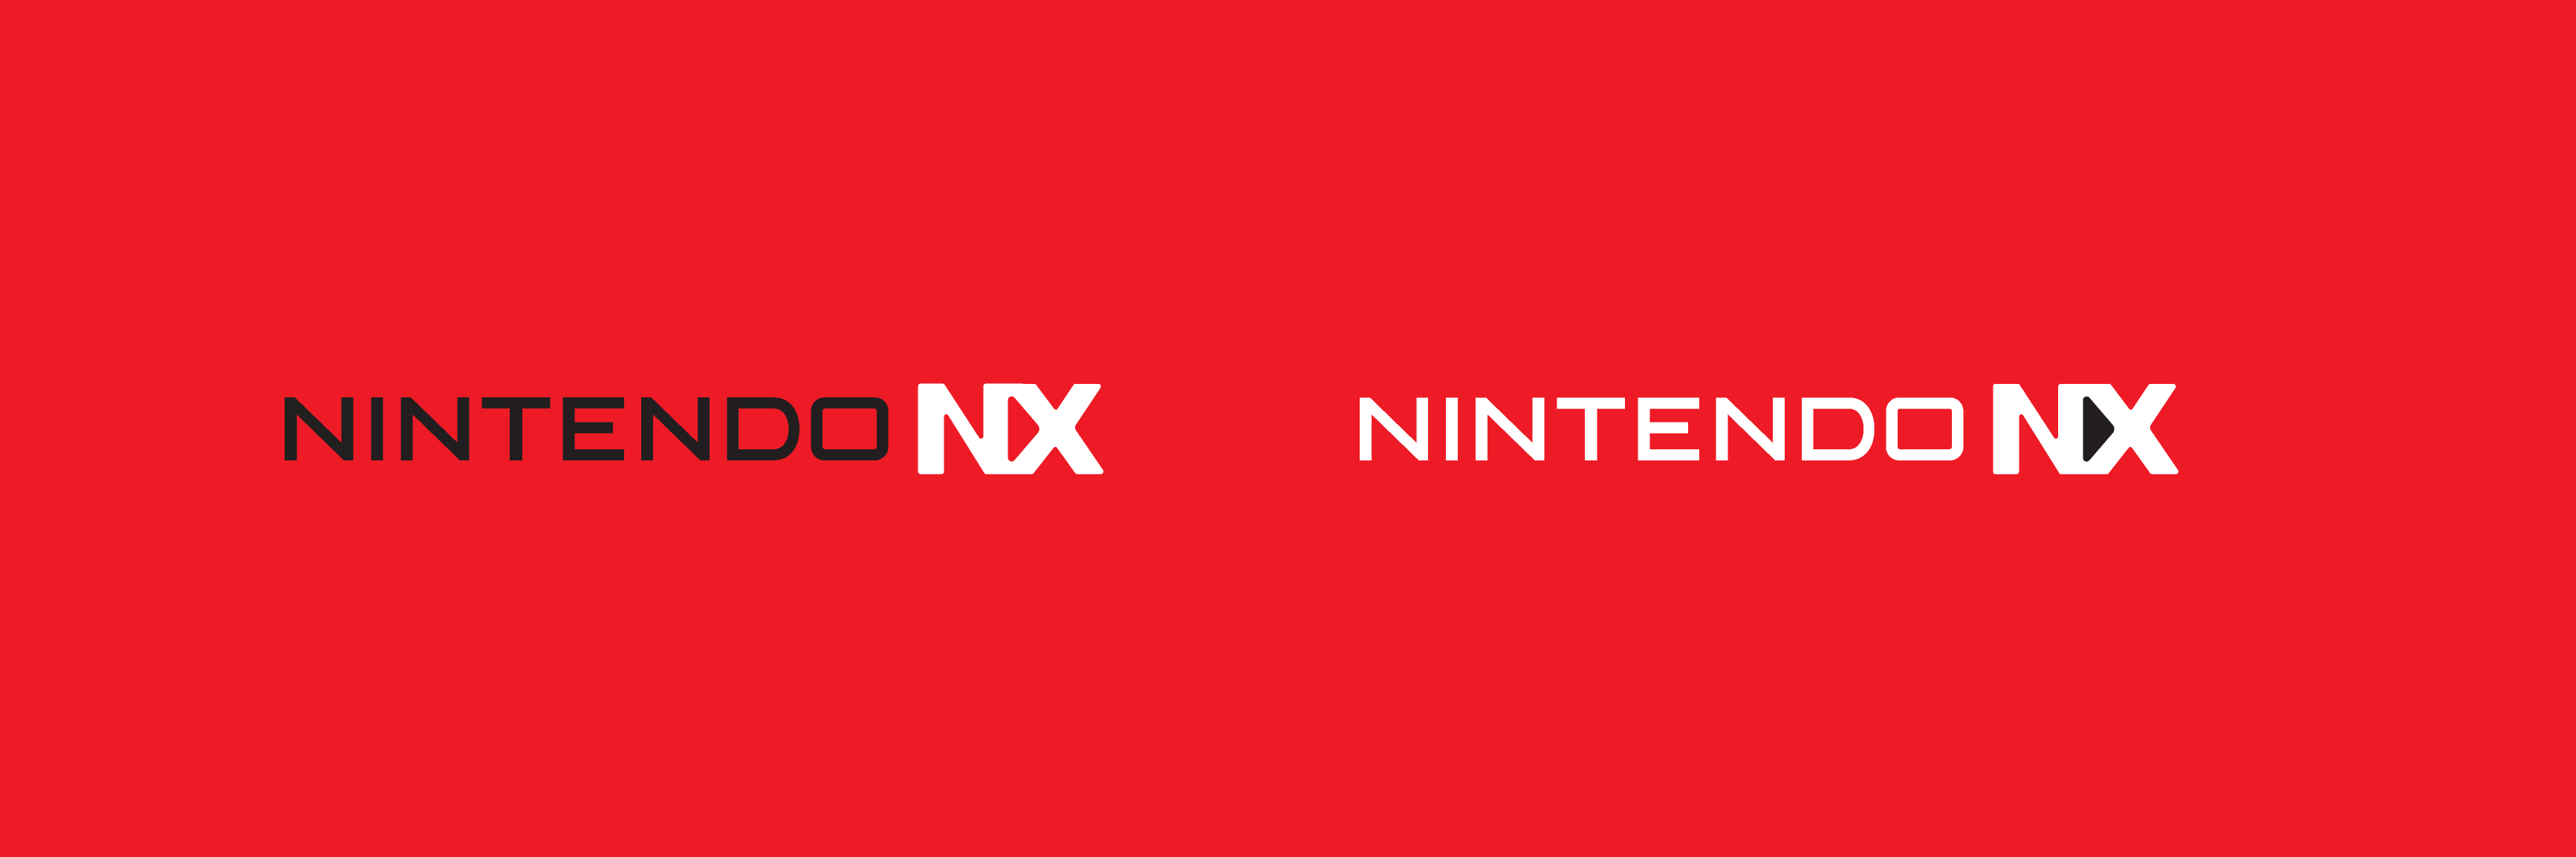 NX Logo - NX Logo Idea (Yes I know NX is not the final name)